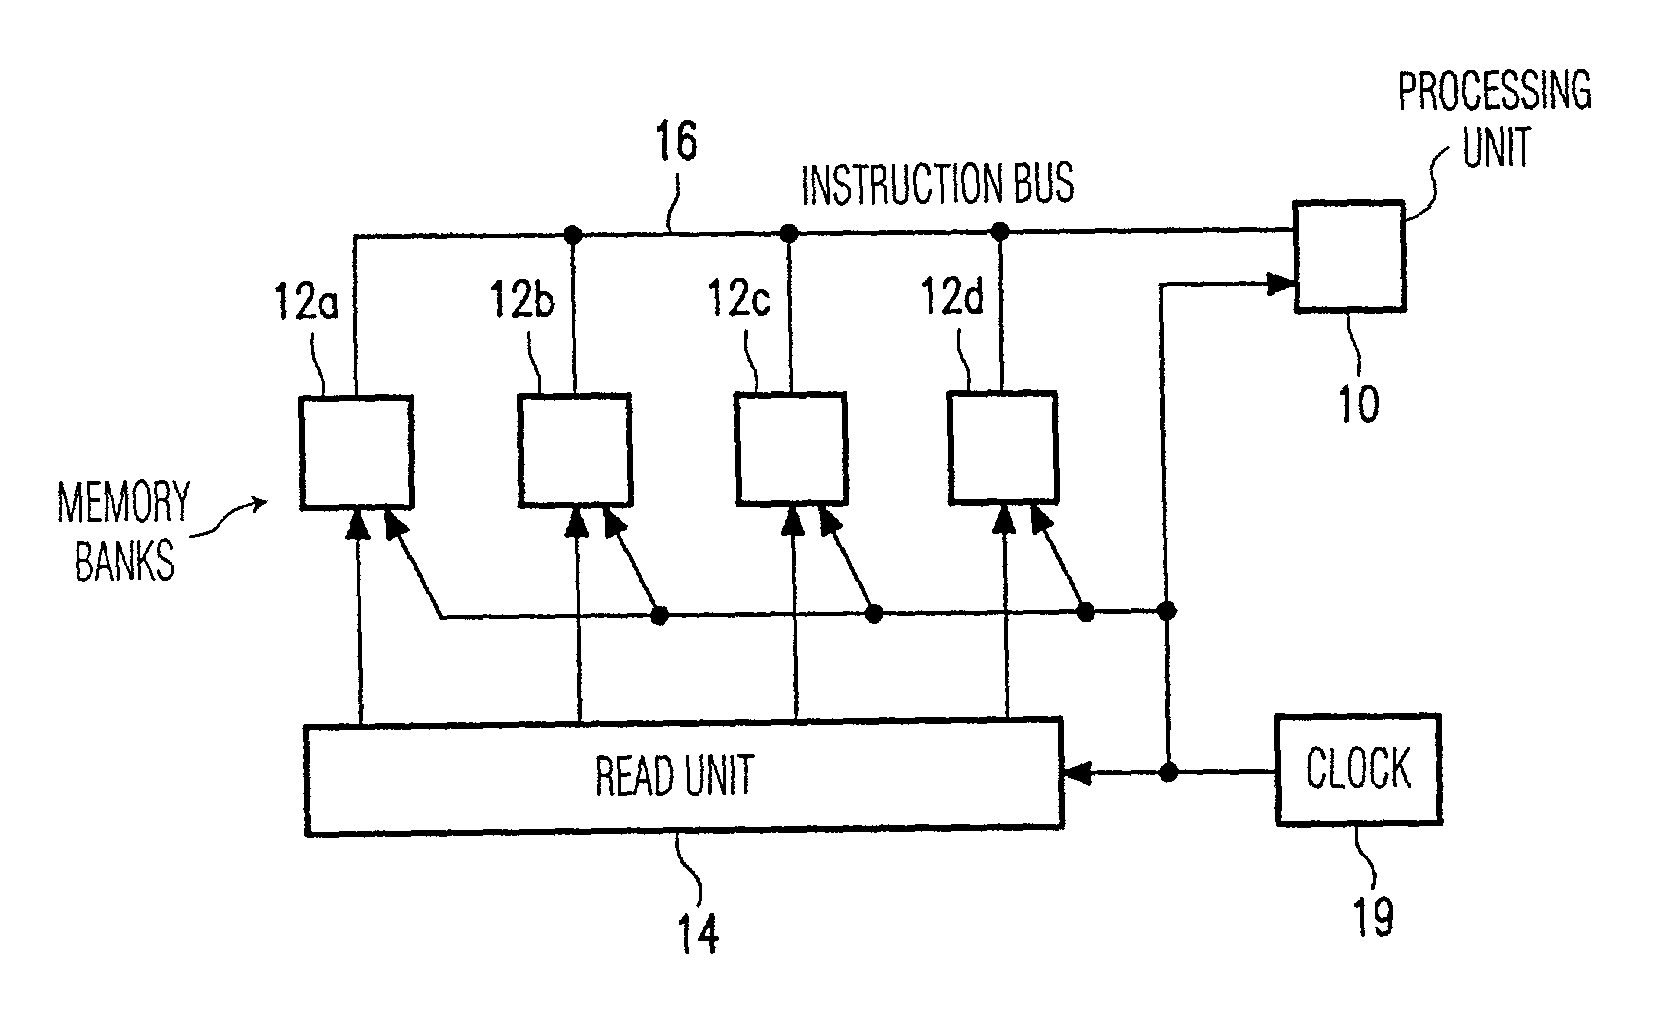 Processor architecture with independently addressable memory banks for storing instructions to be executed